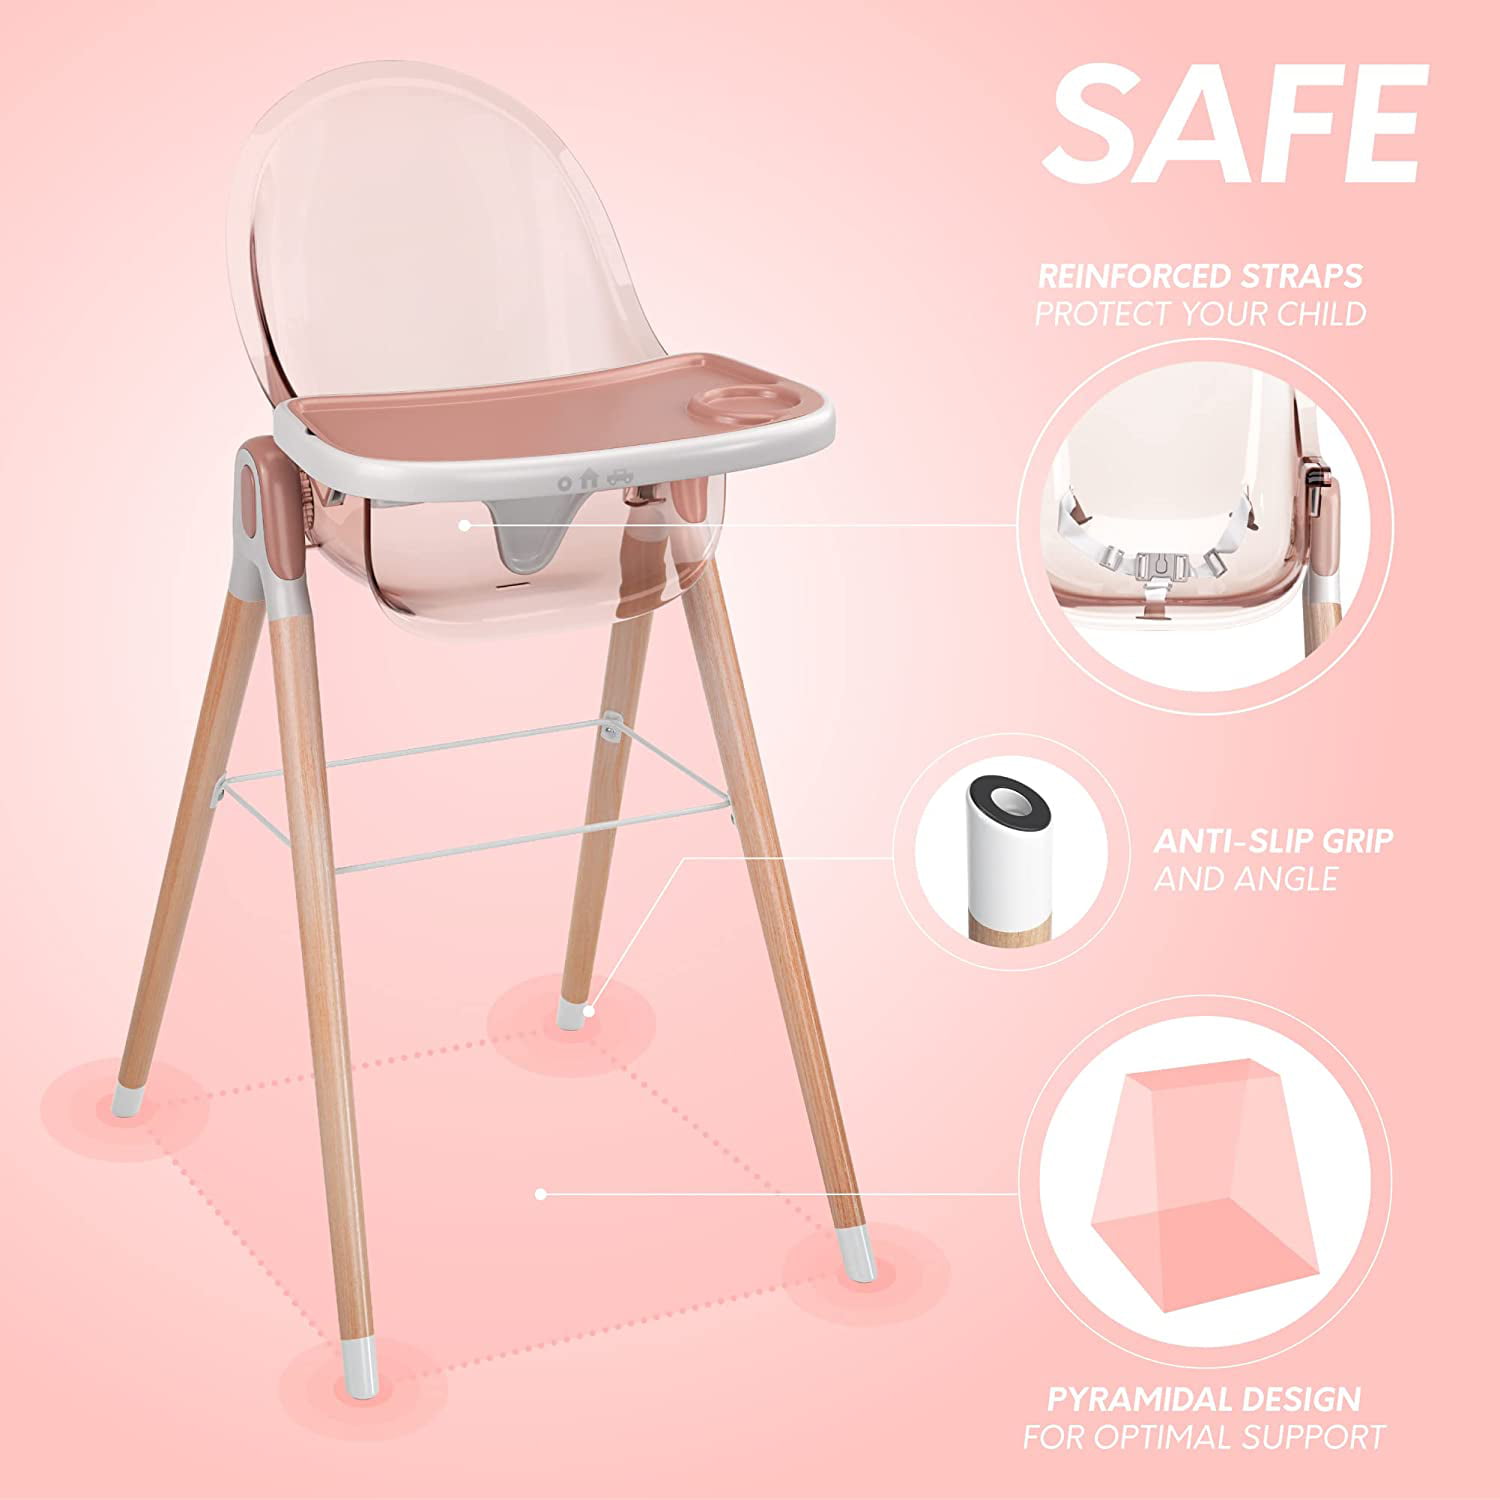 Children of Design 6-in-1 Deluxe High Chair for Babies and